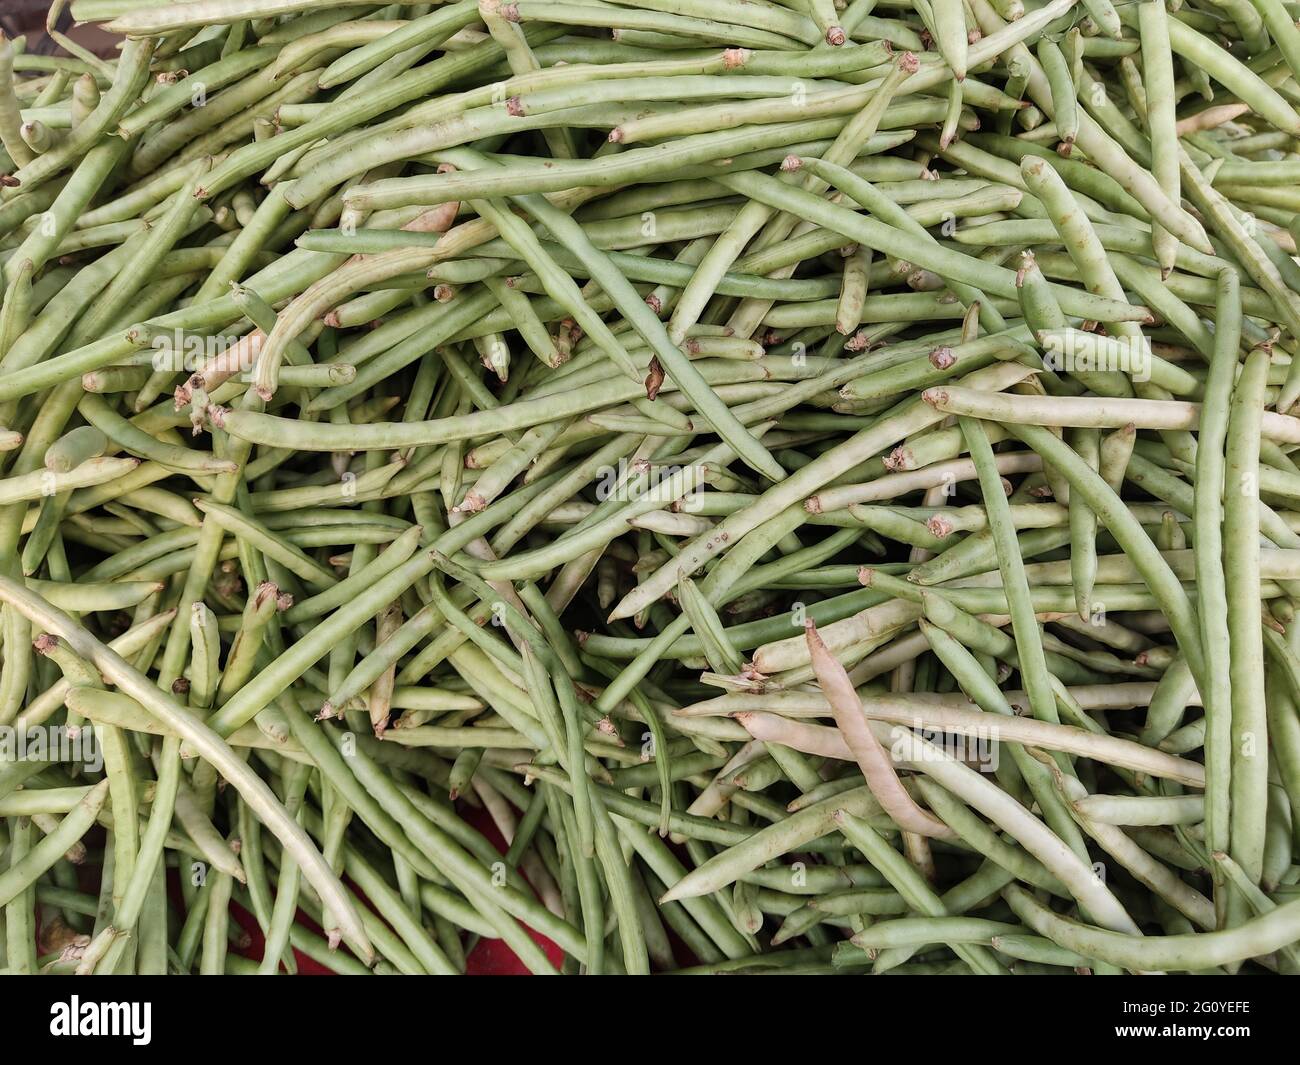 The guar or cluster bean, with the botanical name Cyamopsis tetragonoloba, is an annual legume and the source of guar gum. It is also known as gavar, Stock Photo